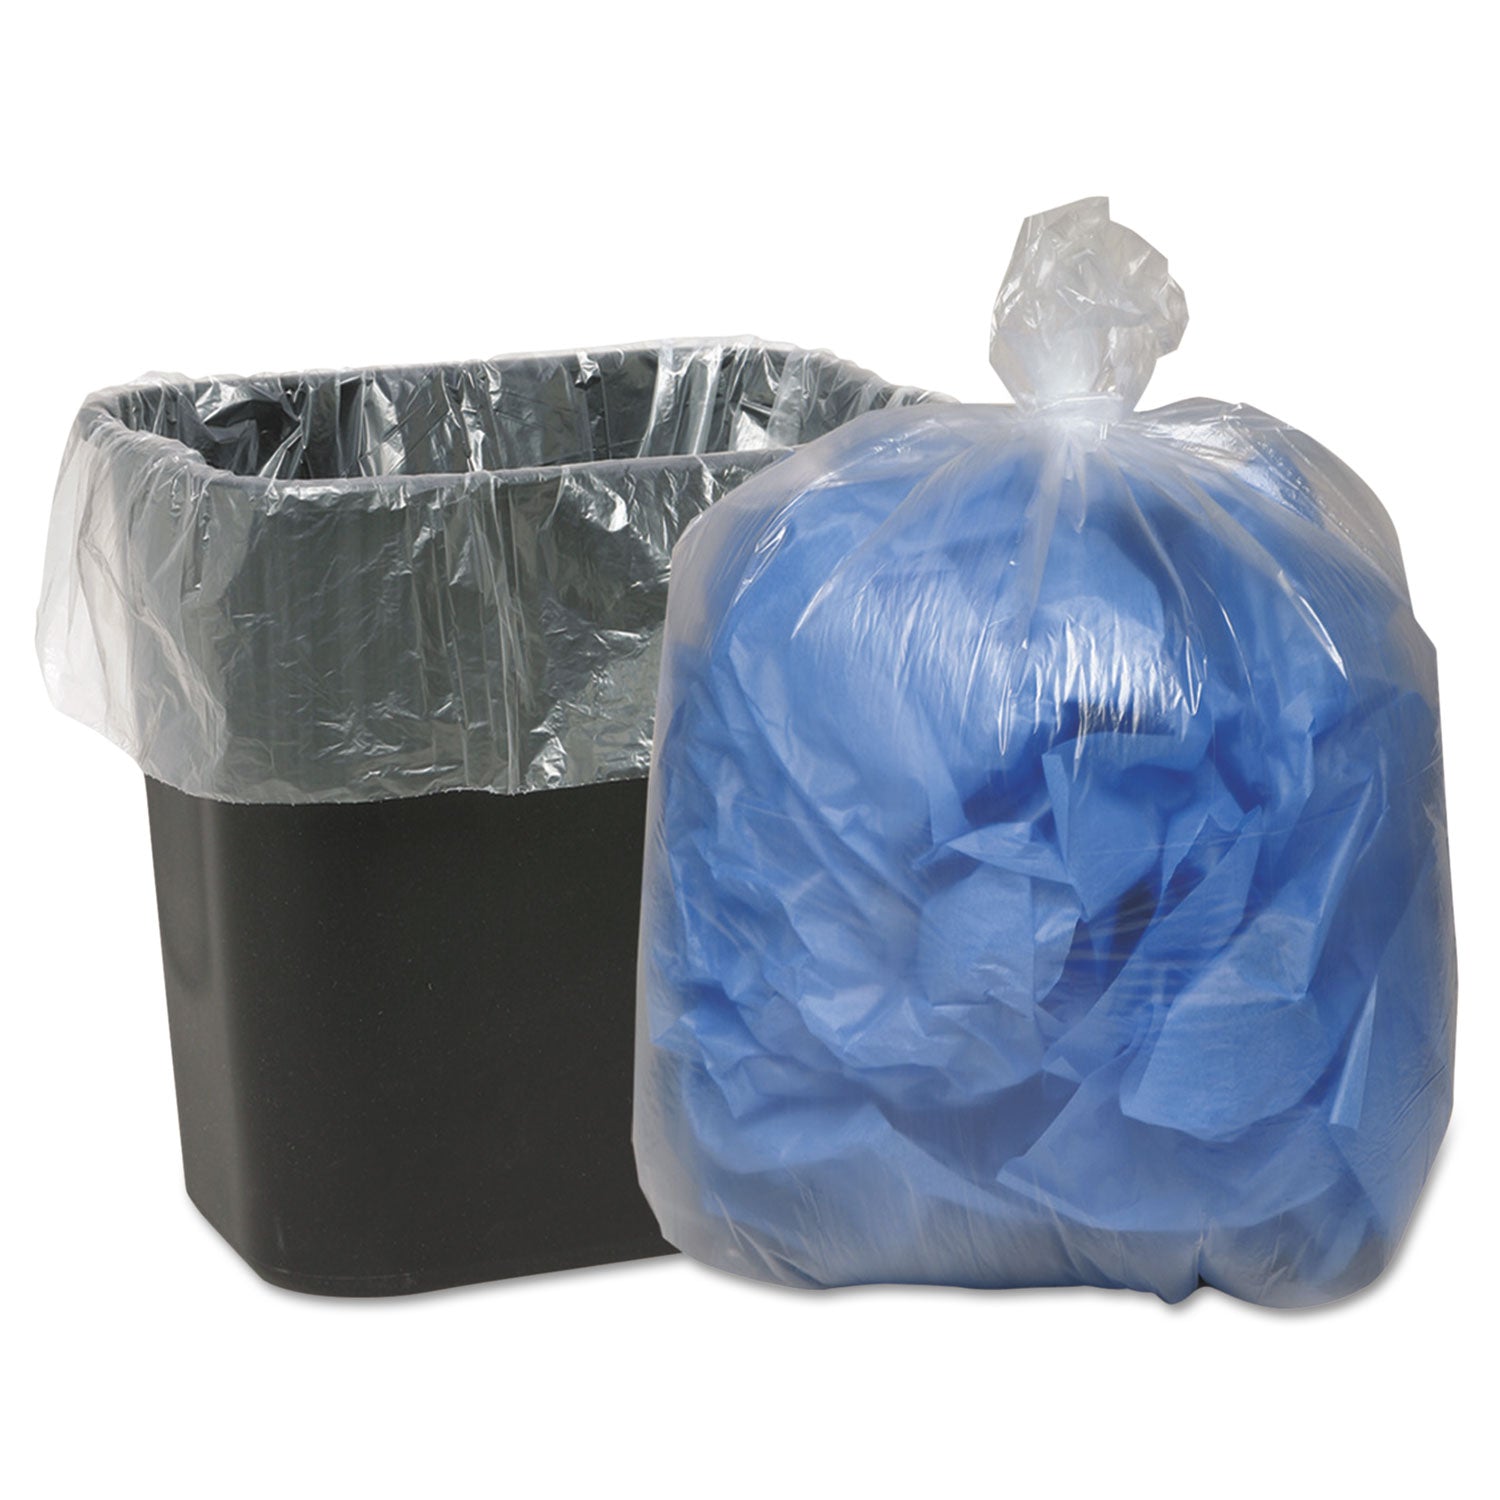 linear-low-density-can-liners-10-gal-06-mil-24-x-23-clear-25-bags-roll-20-rolls-carton_wbi242315c - 2